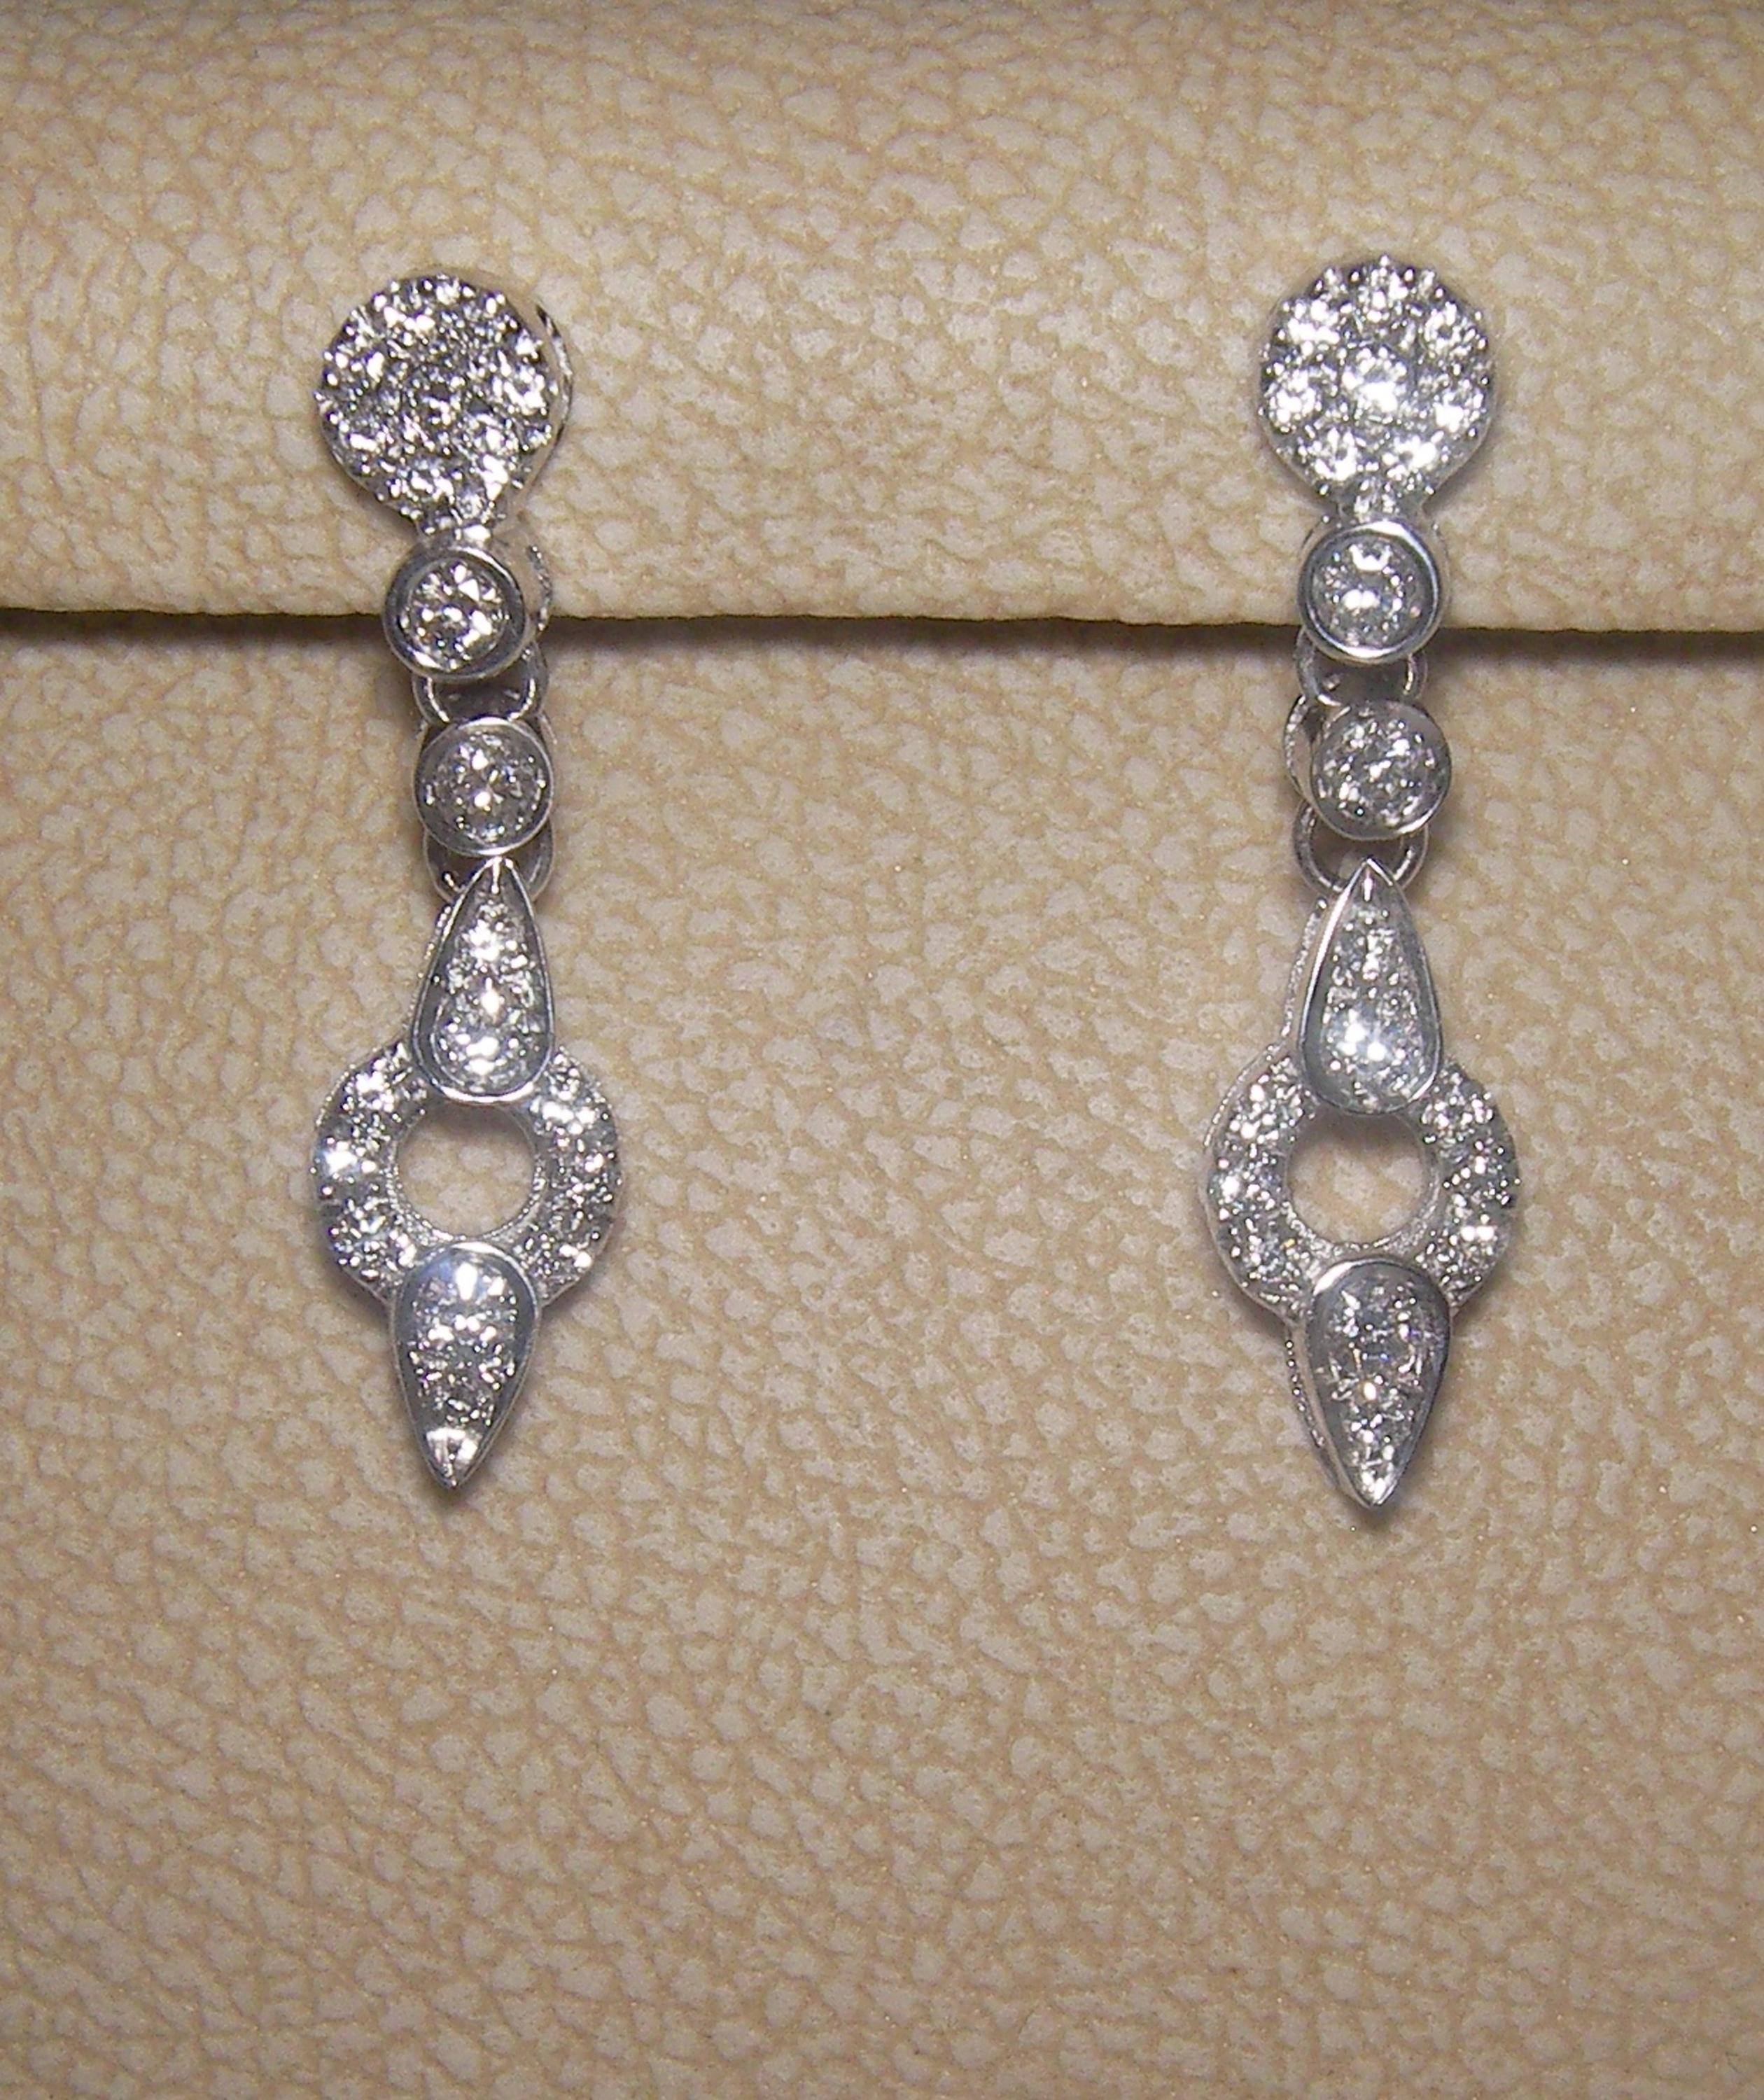 18 Karat White Gold Diamond Dangle Earrings


44 Diamonds 0,72 Carat

Founded in 1974, Gianni Lazzaro is a family-owned jewelery company based out of Düsseldorf, Germany.
Although rooted in Germany, Gianni Lazzaro's style and design is more